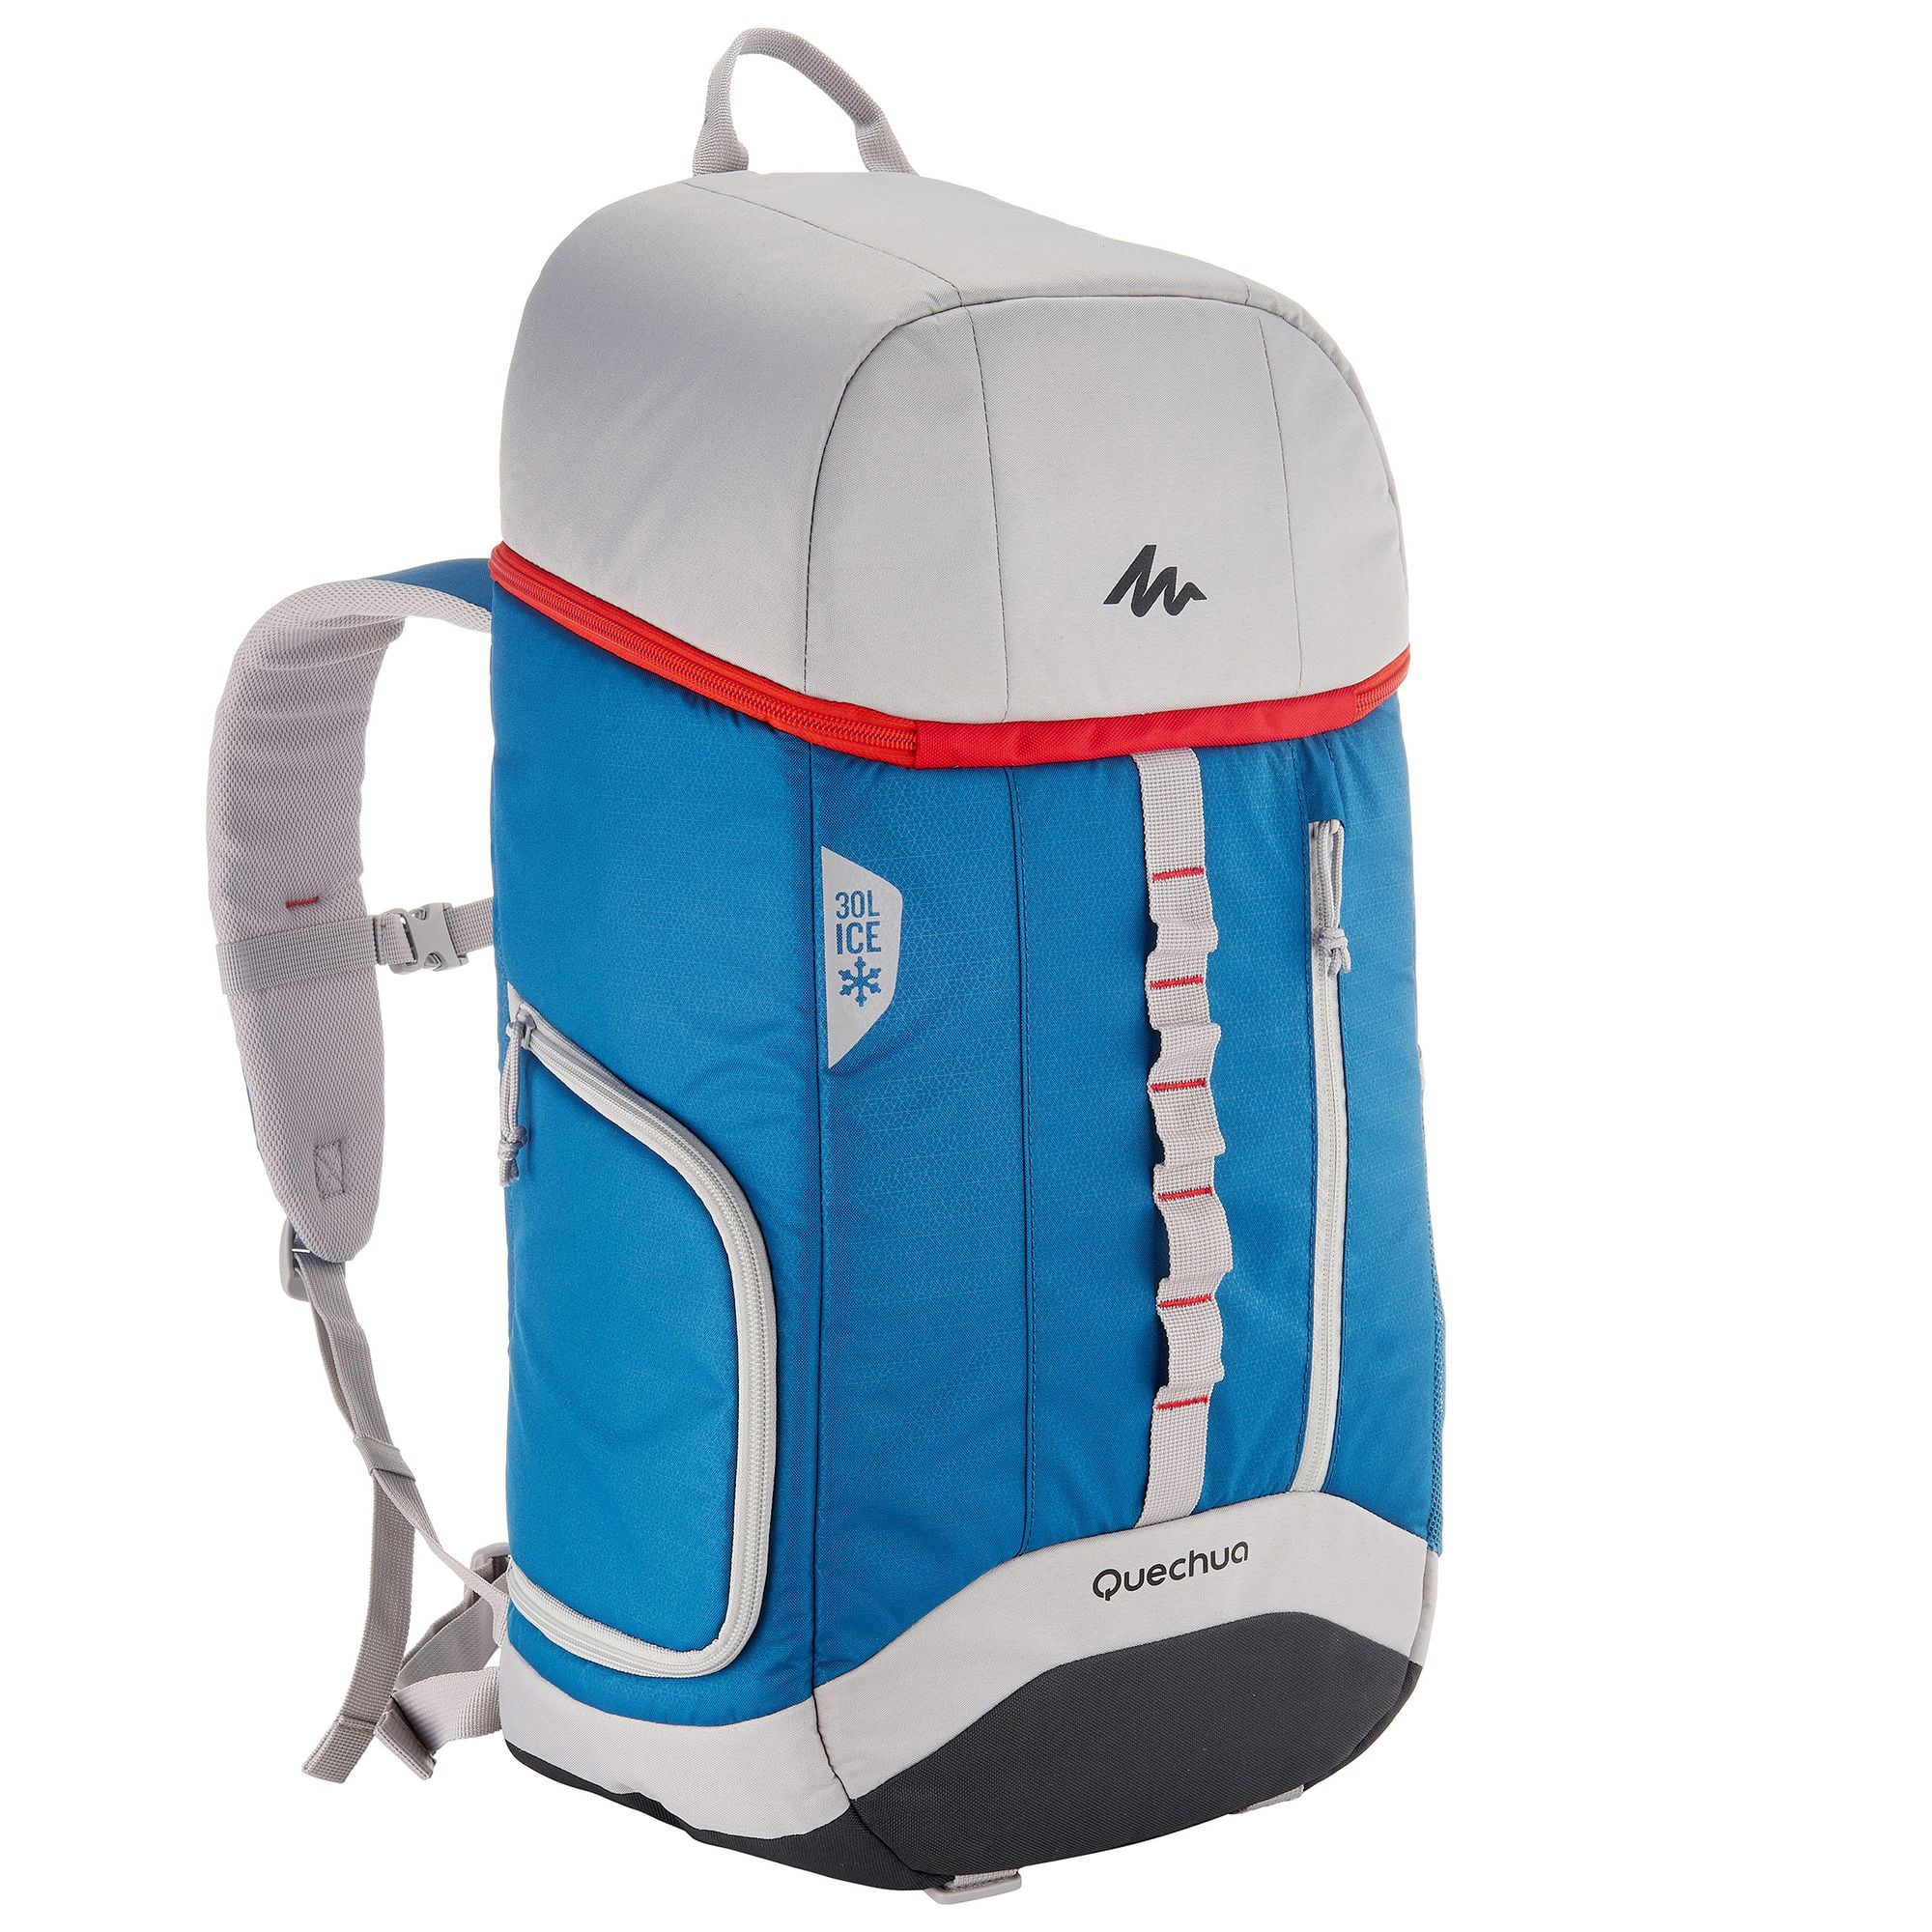 Quechua by DECATHLON - Country Walking Backpack 30L NH100 #Ad #Country,  #AFFILIATE, #DECATHLON, #Quechua | Hiking backpack, Backpacks, Petrol blue